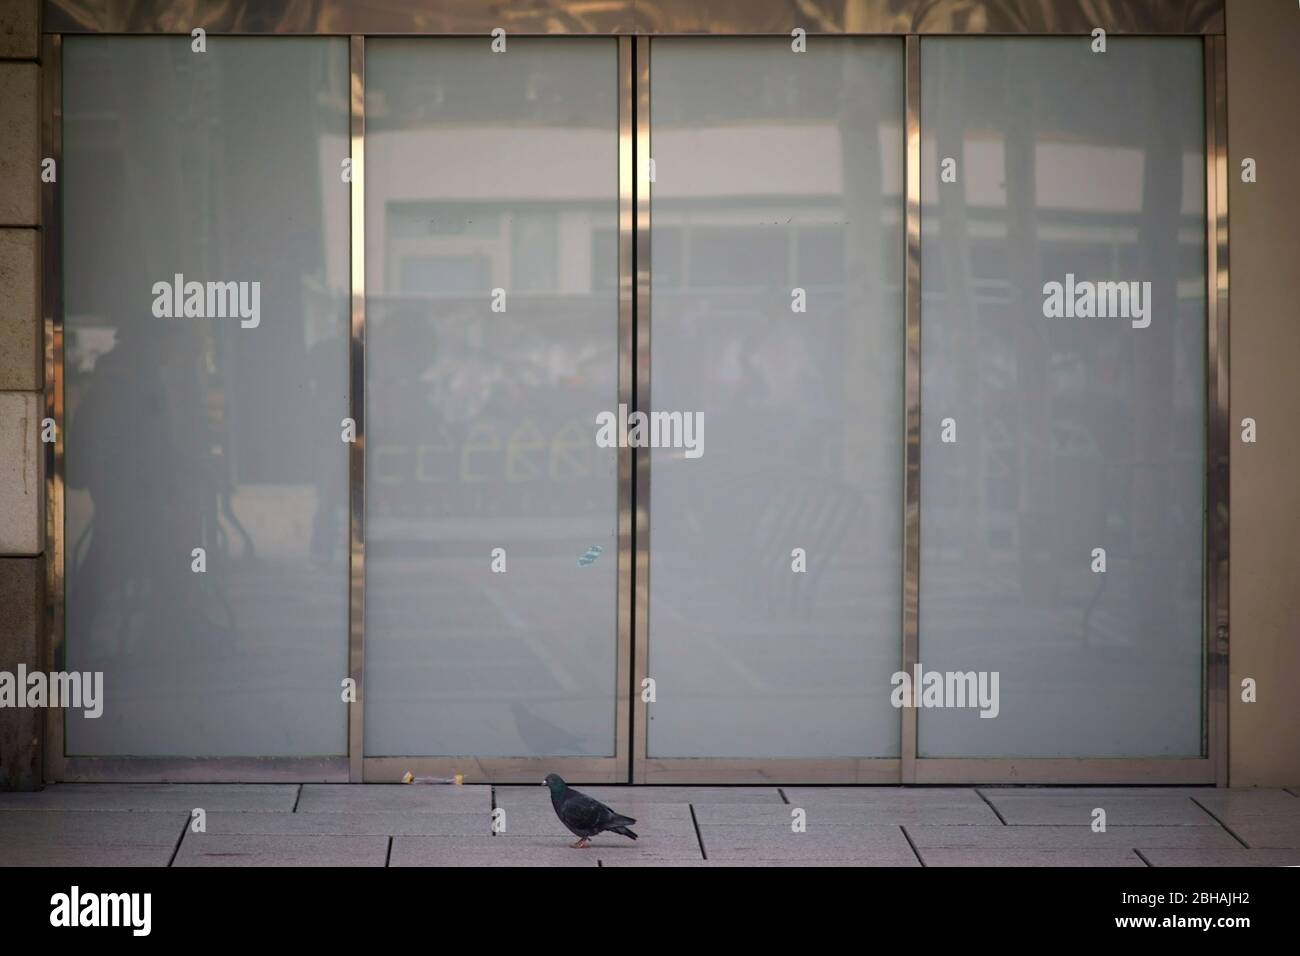 A modern sliding glass door of a shopping mall with shiny metal frame. Stock Photo